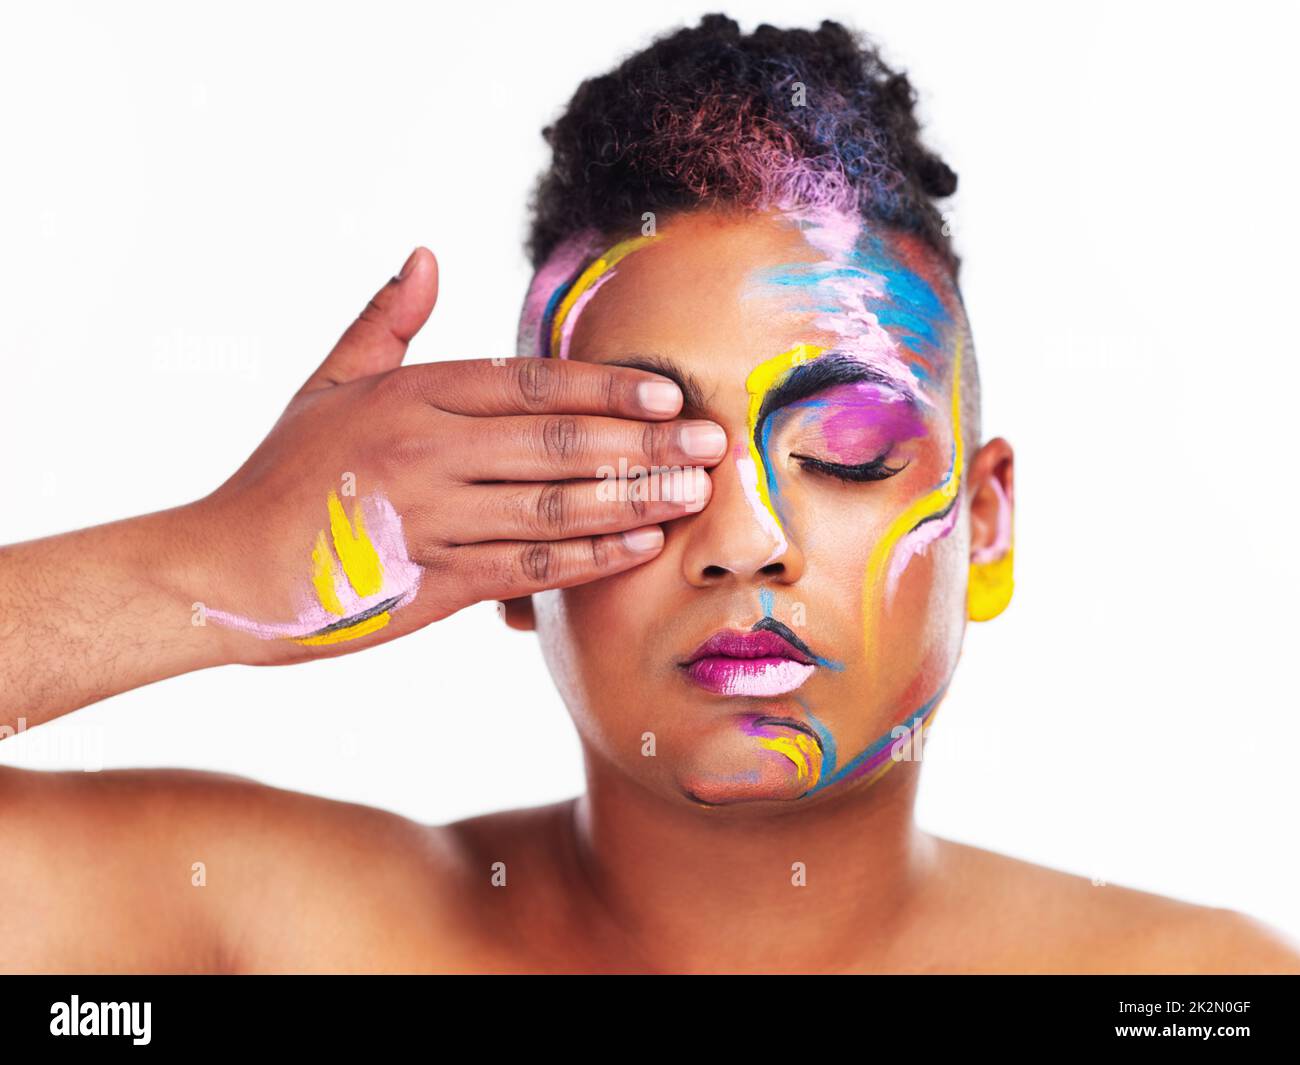 How you identify is your decision and no one elses. Cropped shot of a gender fluid young man wearing face paint against a white background. Stock Photo